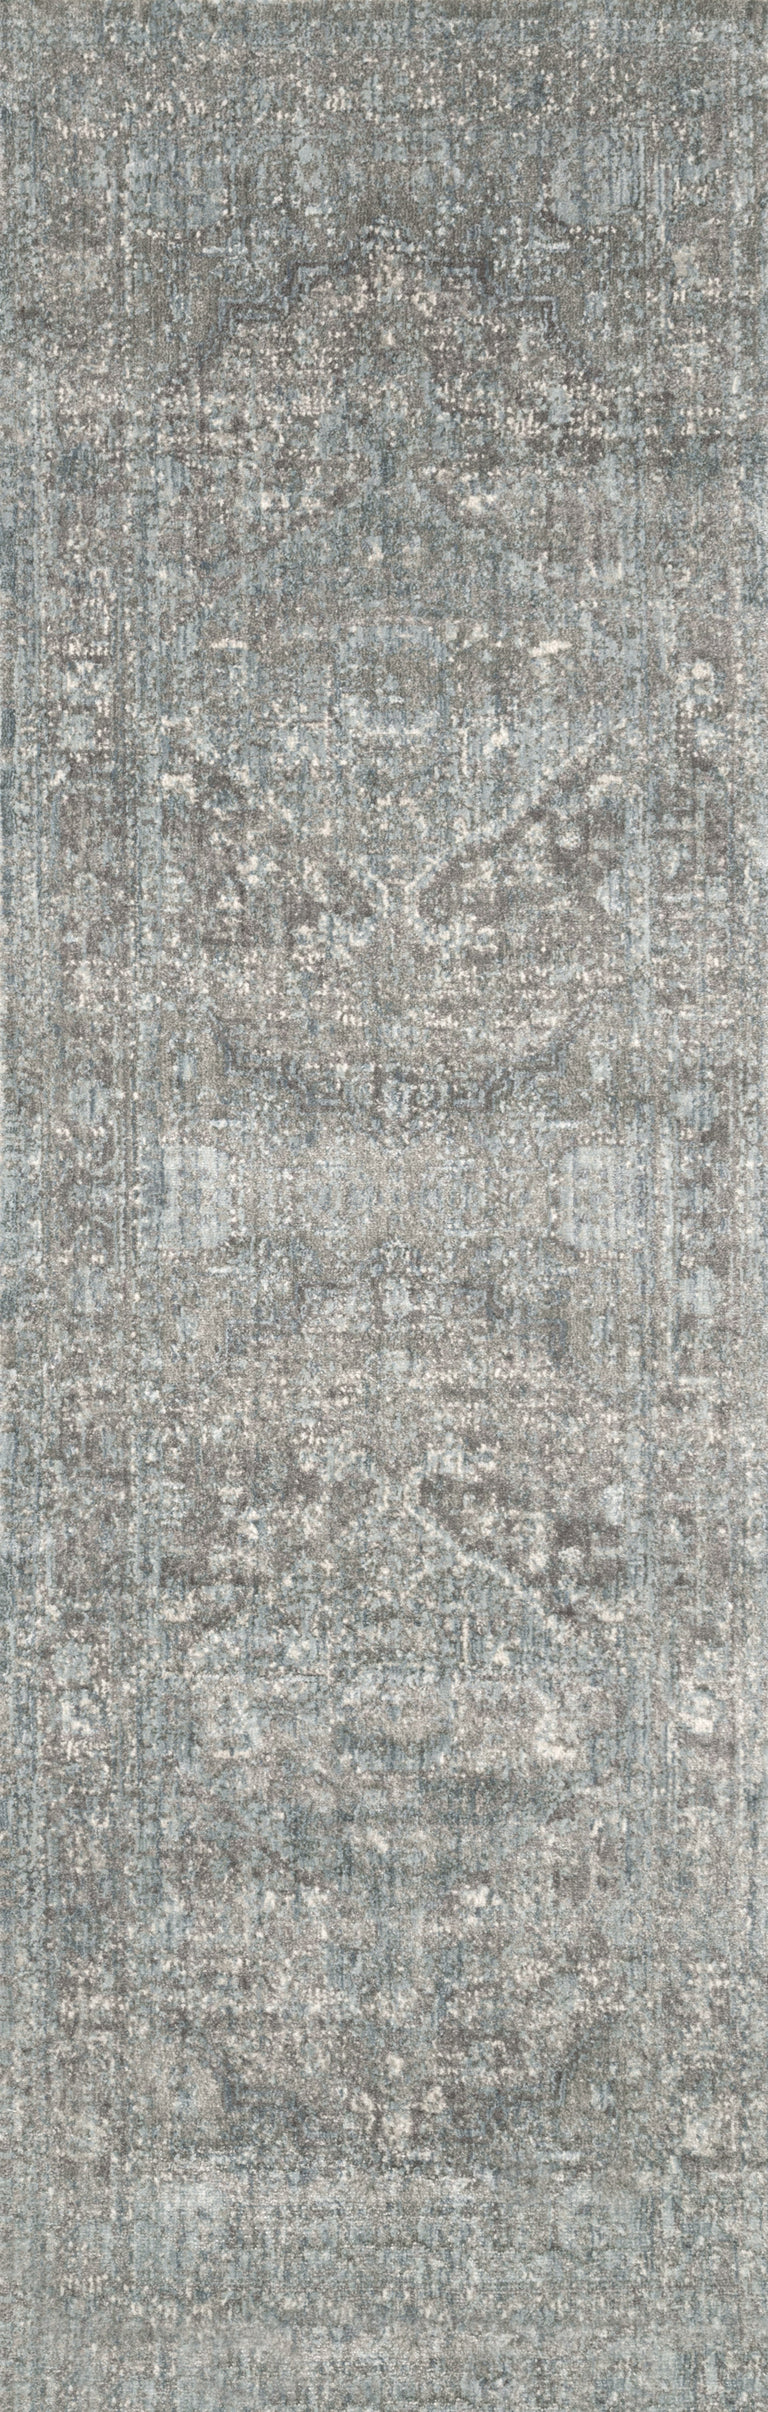 Loloi Rugs Anastasia Collection Rug in Stone, Blue - 6'7" x 9'2"